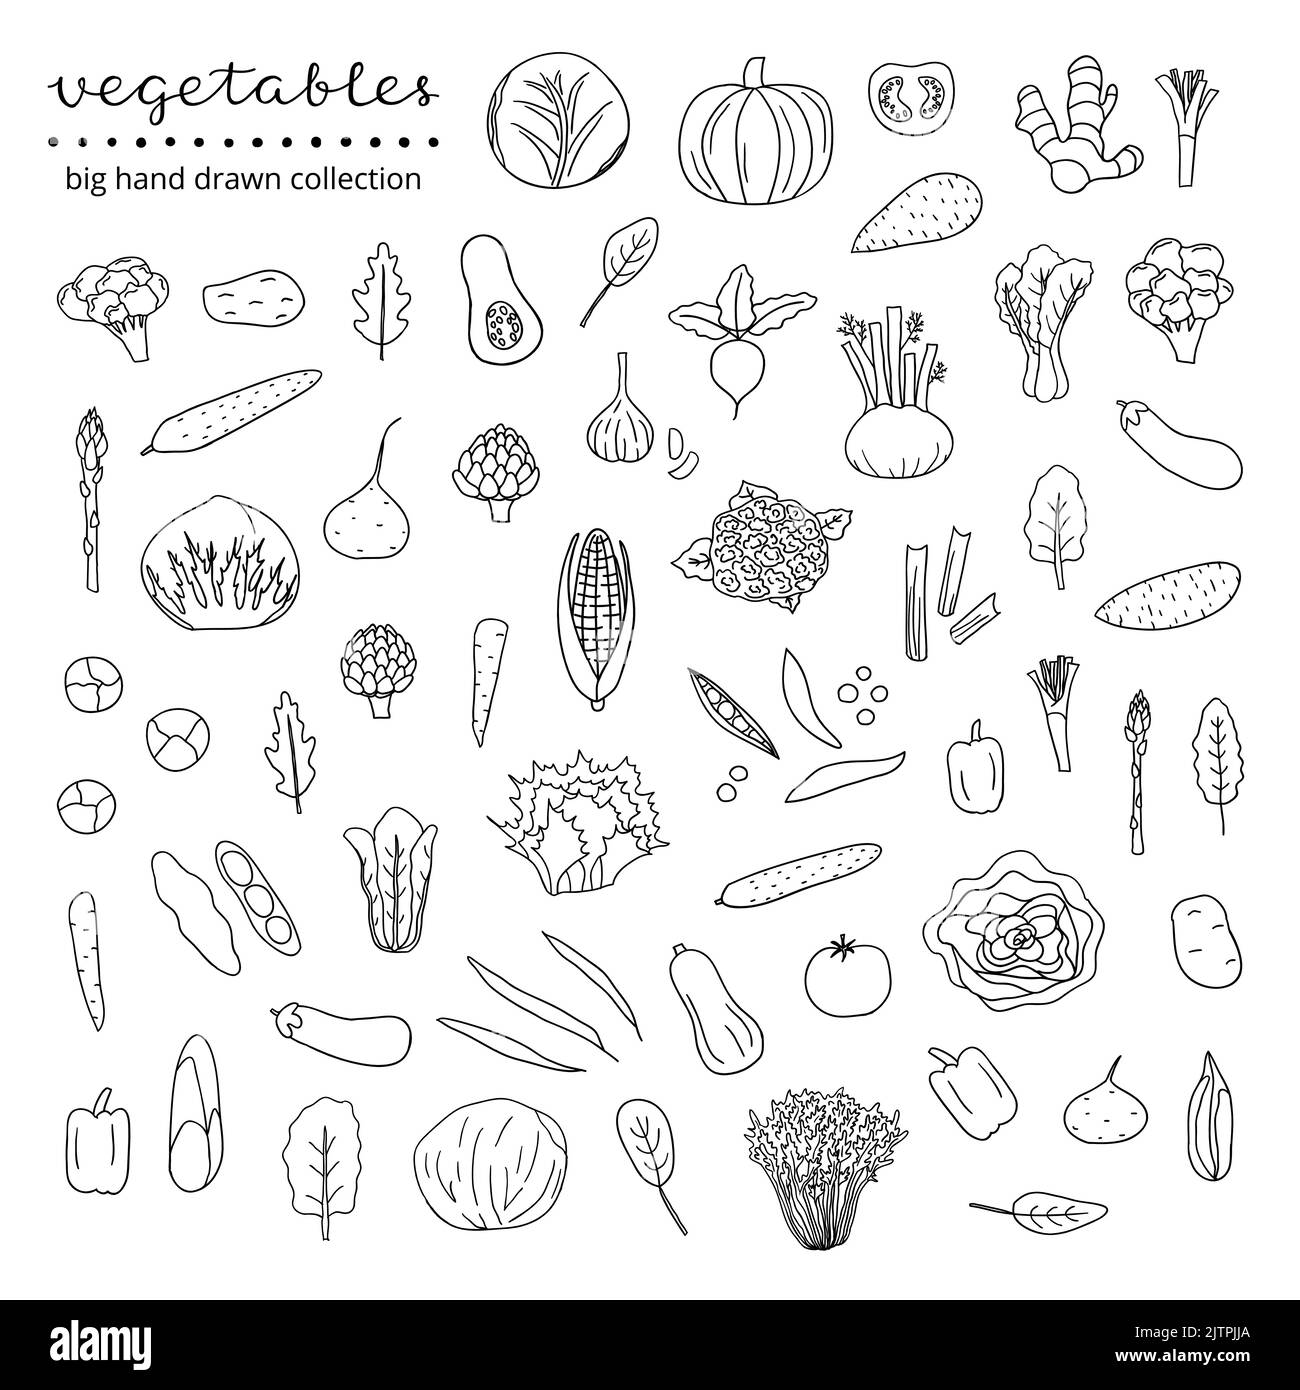 Big collection of hand drawn outline vegetables and leafy greens isolated on white background. Stock Vector